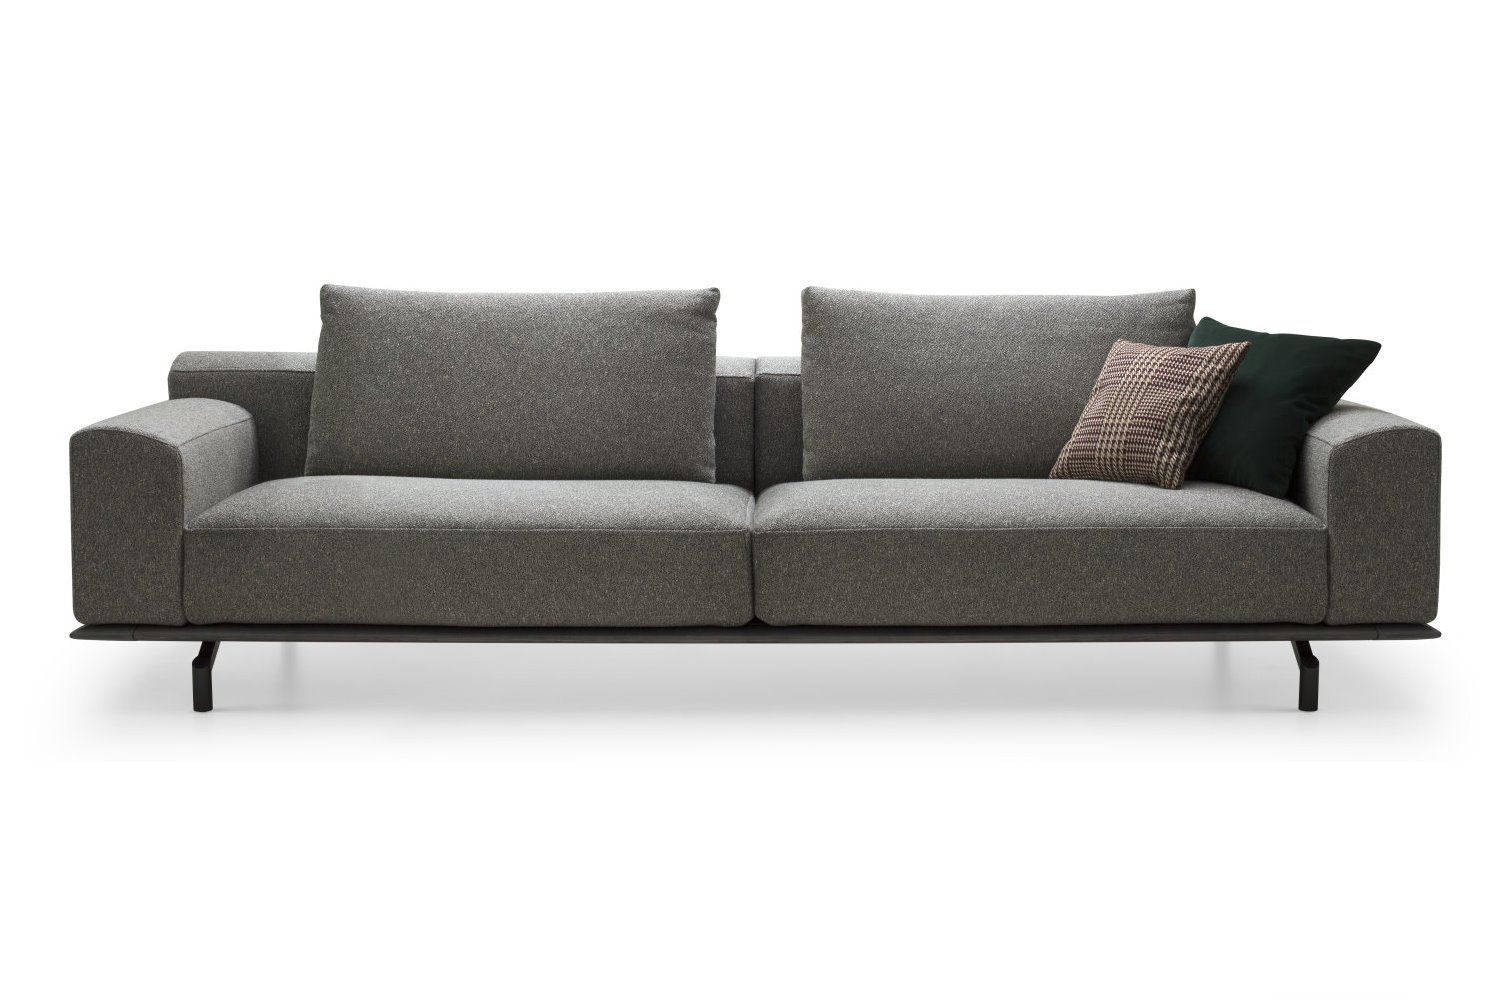 Modular sofa with removable Fly